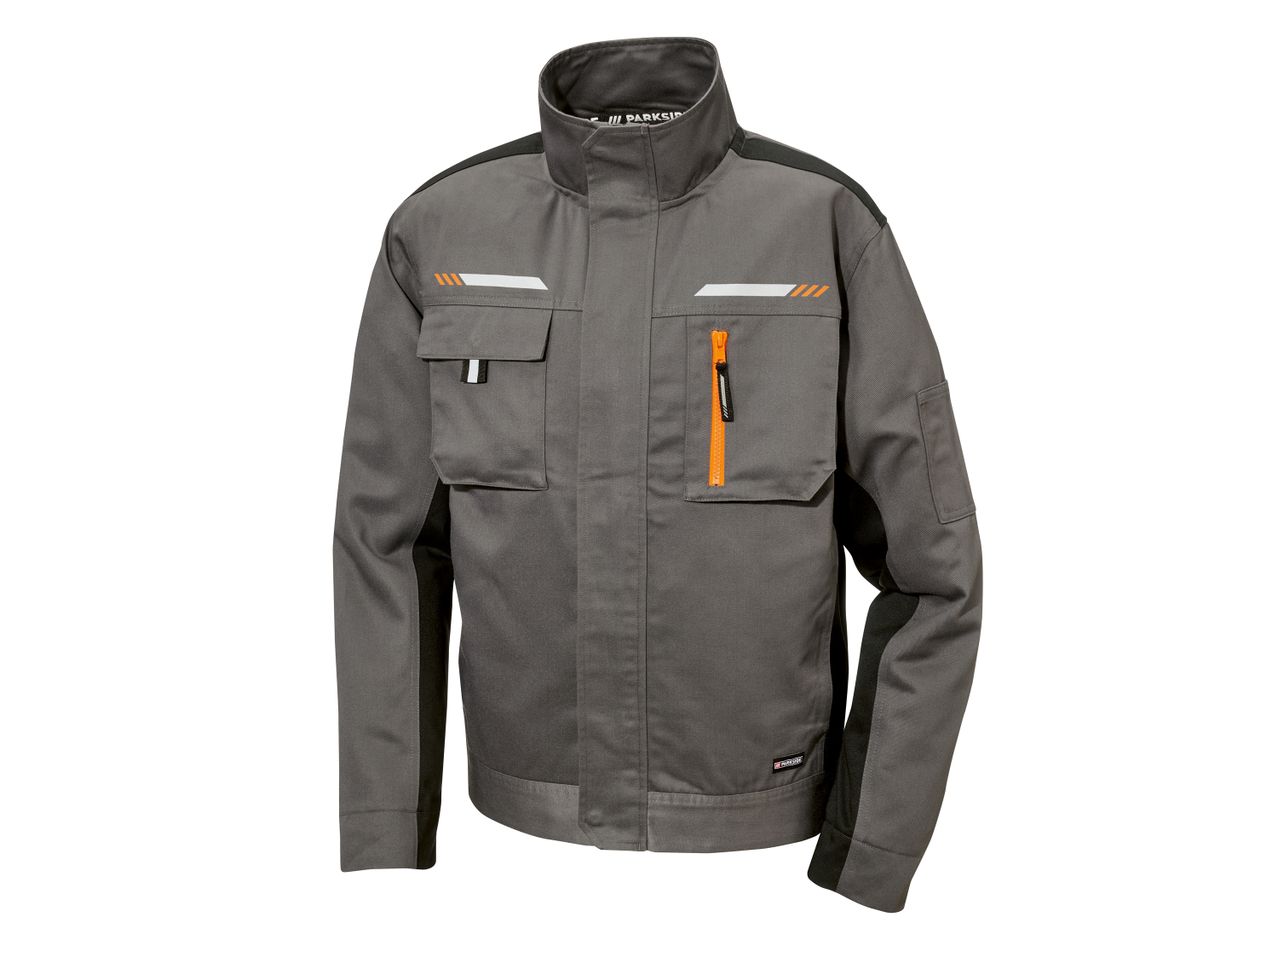 Go to full screen view: Men’s Work Jacket - Image 1